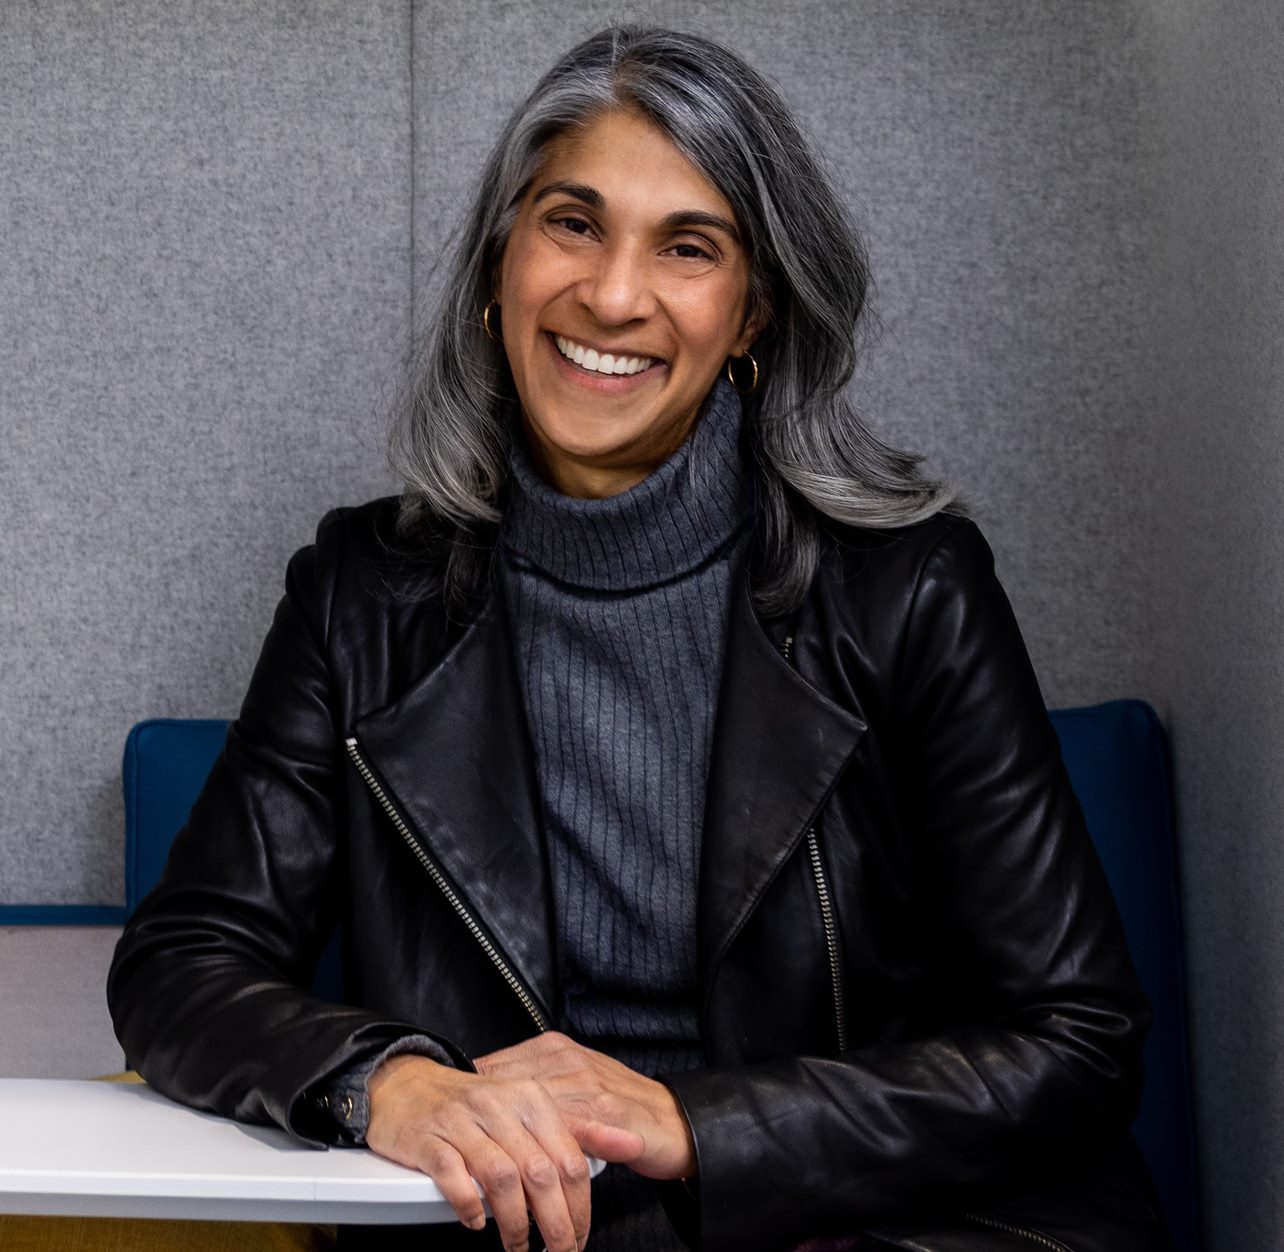 A+headshot+of+a+smiling+woman+with+silver+hair%2C+wearing+a+dark-gray+sweater+and+a+black+leather+jacket%2C+sitting+in+a+blue+chair.+The+background+is+a+gray+wall.